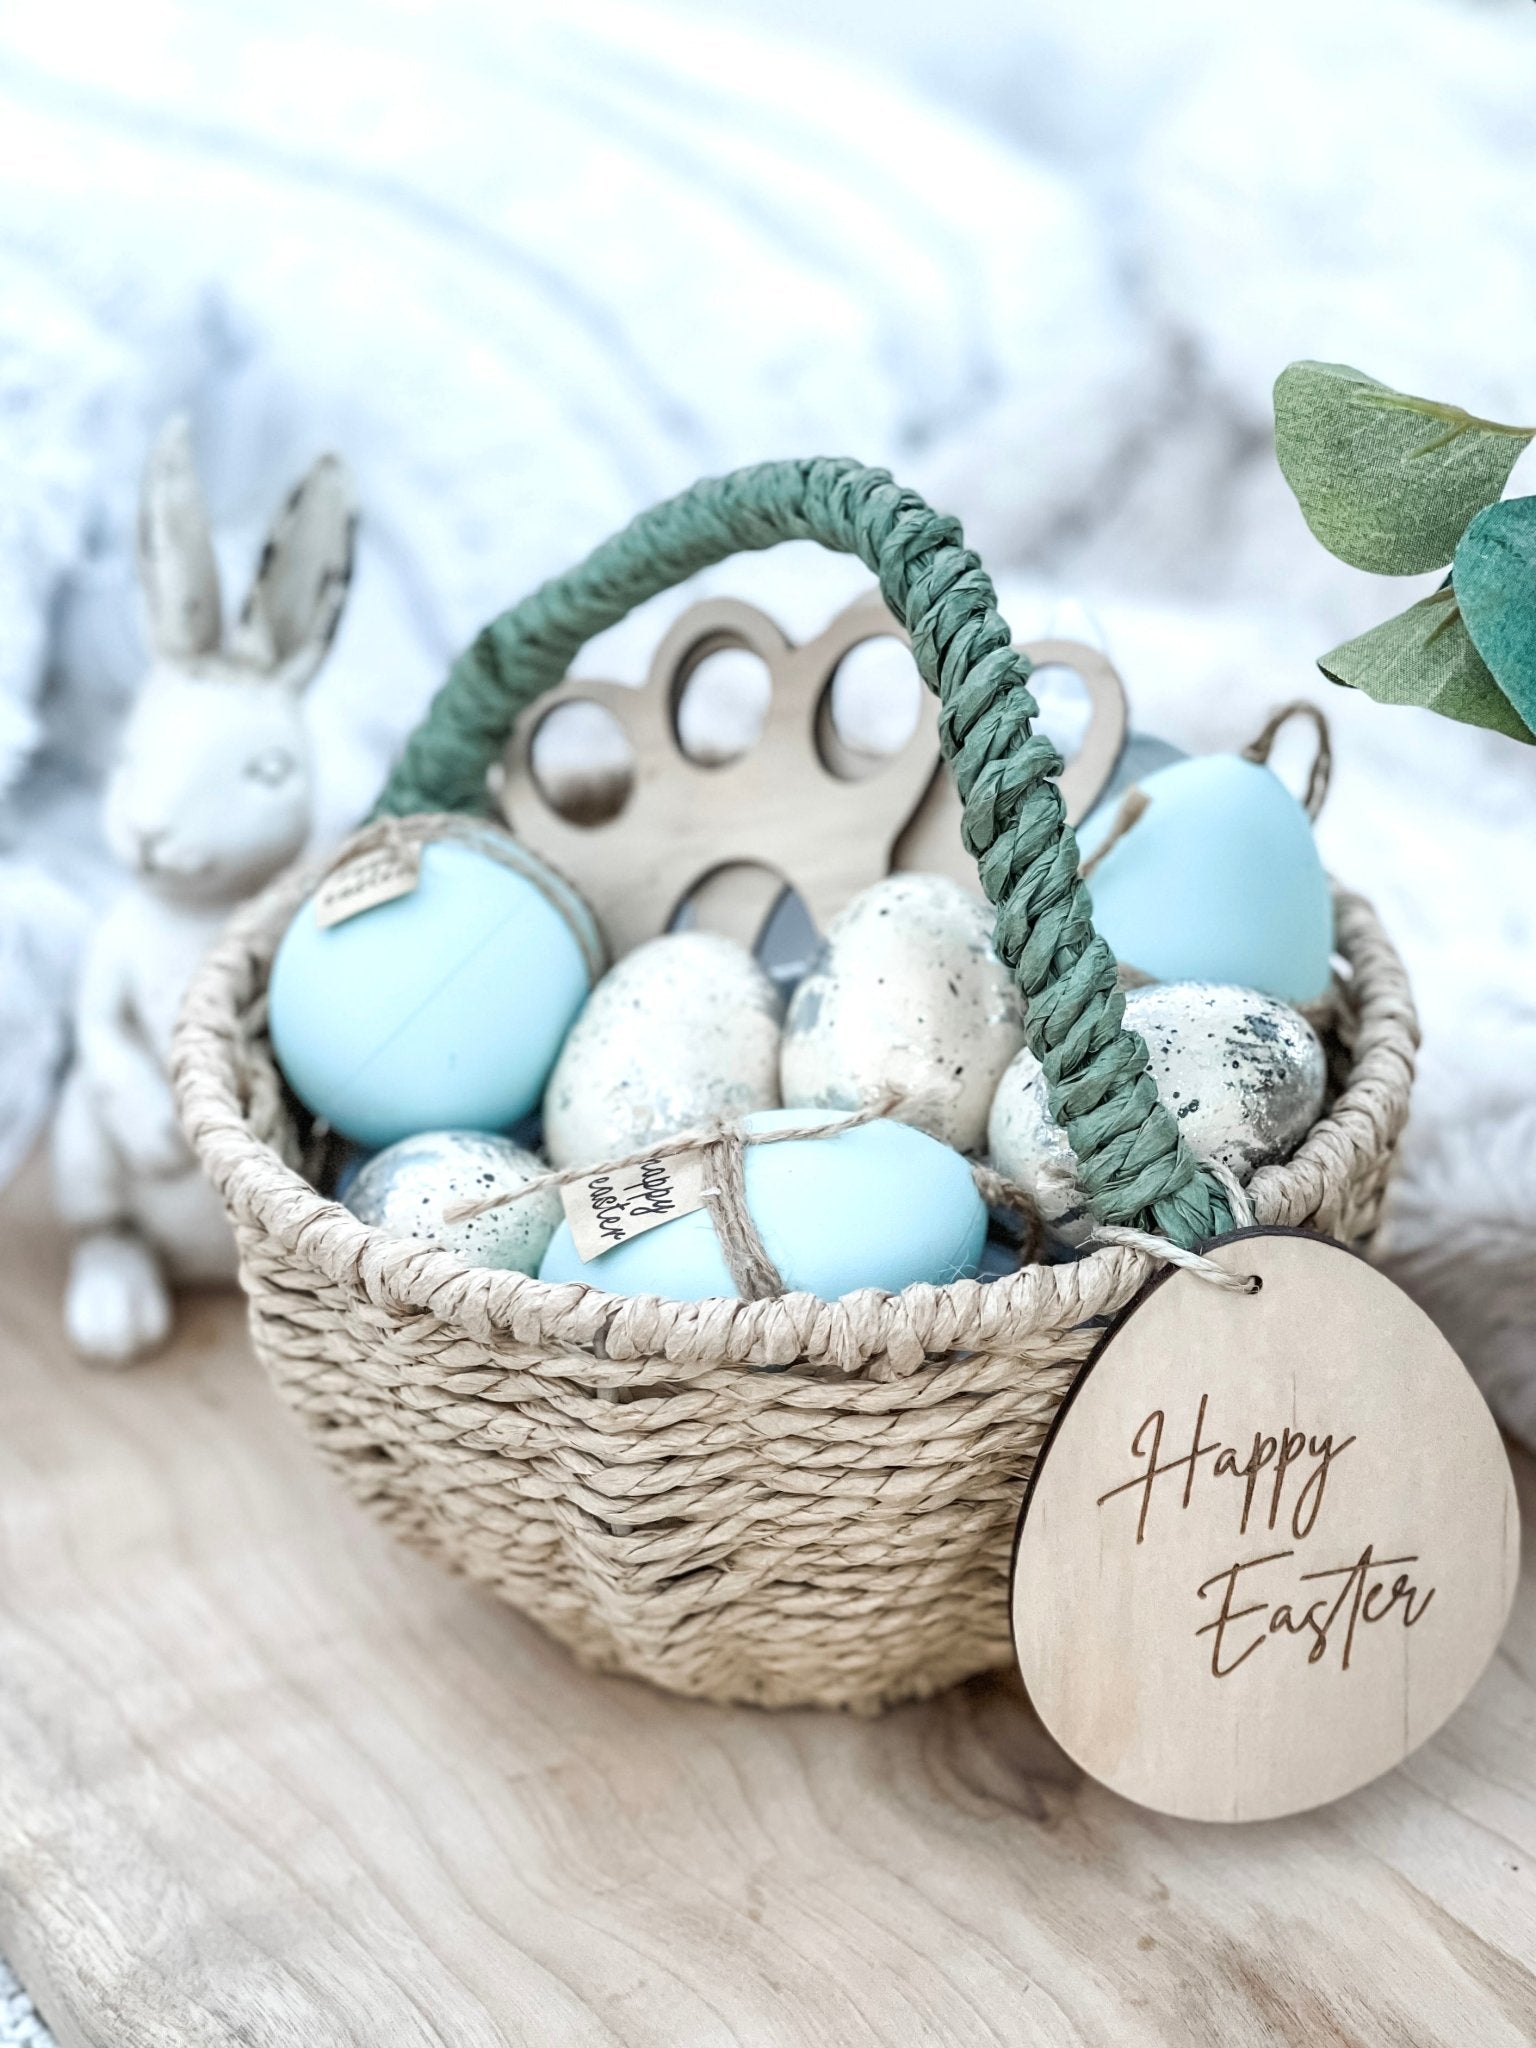 Little Leaf Decorative Easter Egg - The Humble Gift Co.